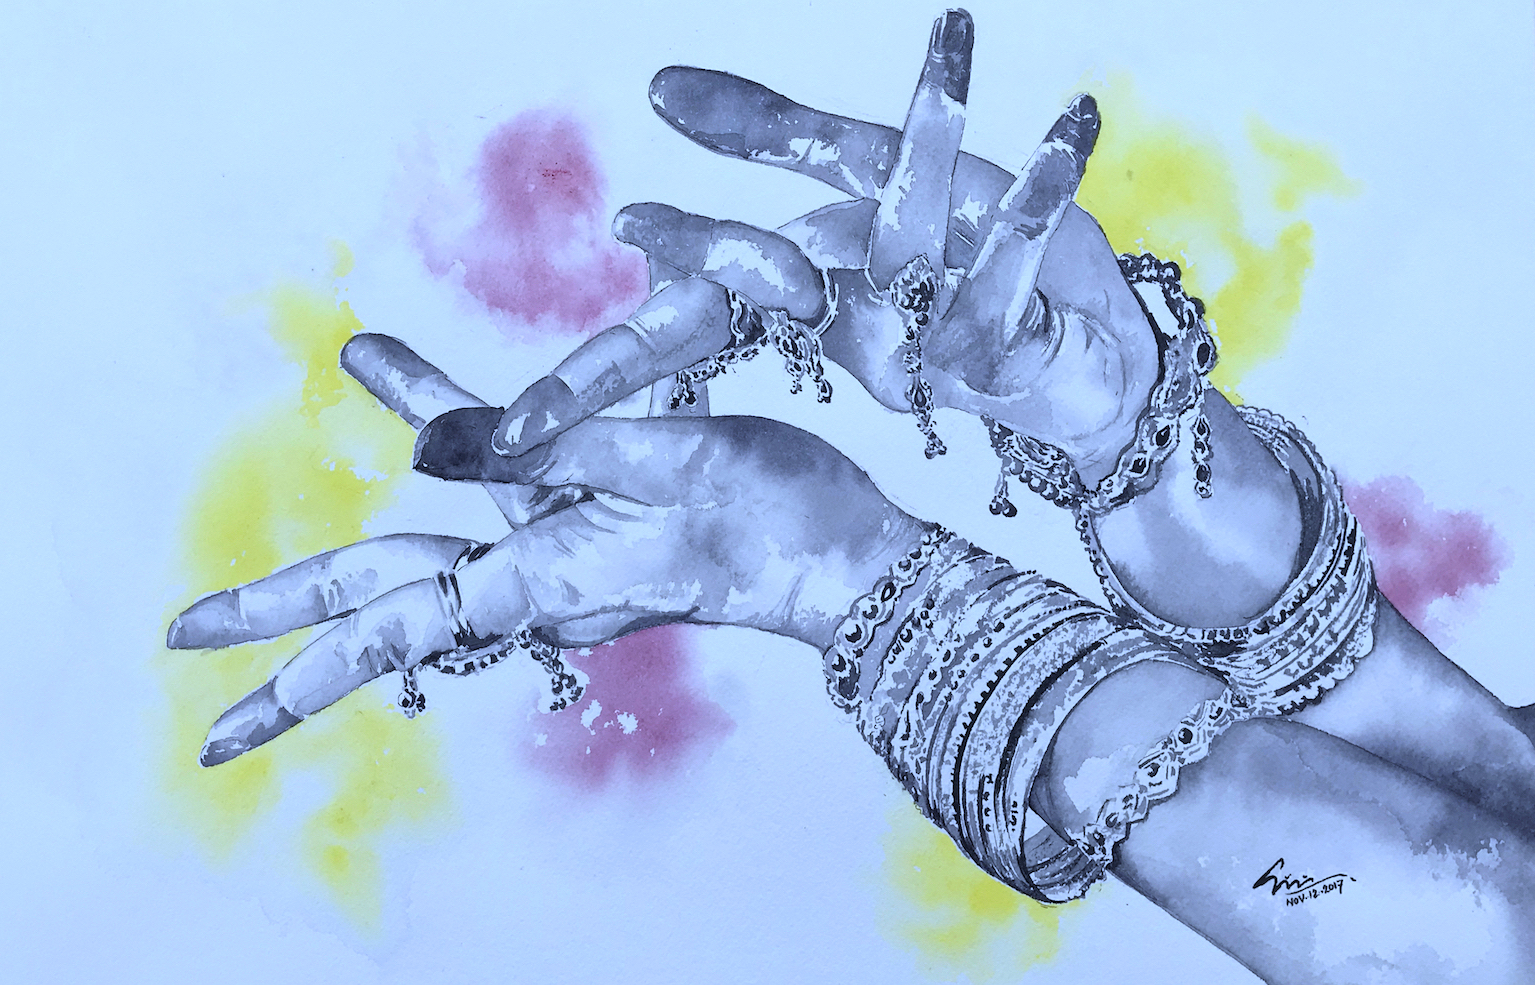 The Signing System of Mudra in Traditional Indian Dance | Semantic Scholar